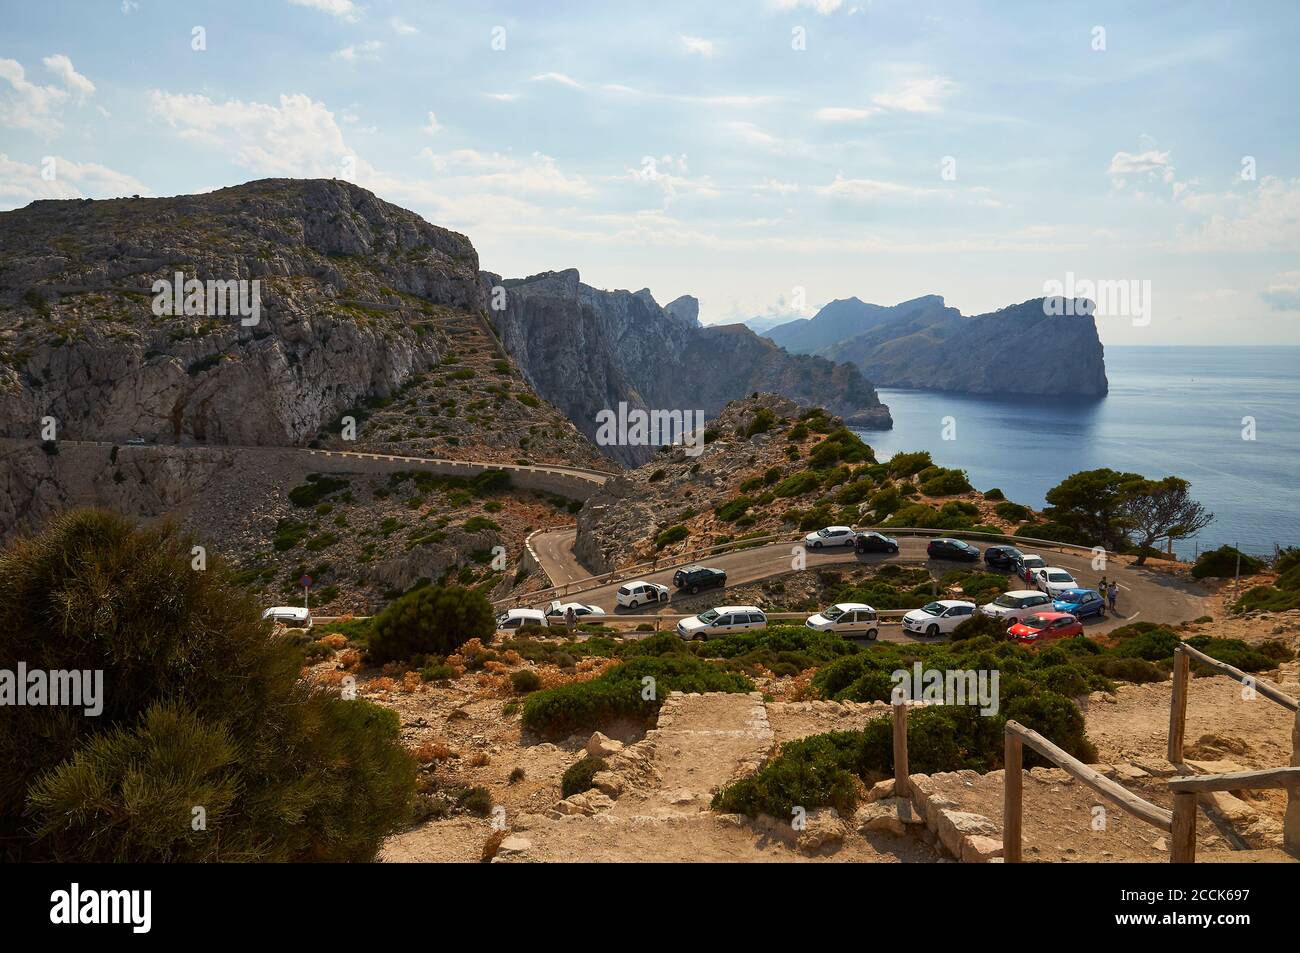 Traffic jam at the road to Formentor cape lighthouse, with coastline landscape in the background (Majorca, Balearic Islands, Mediterranean sea, Spain) Stock Photo